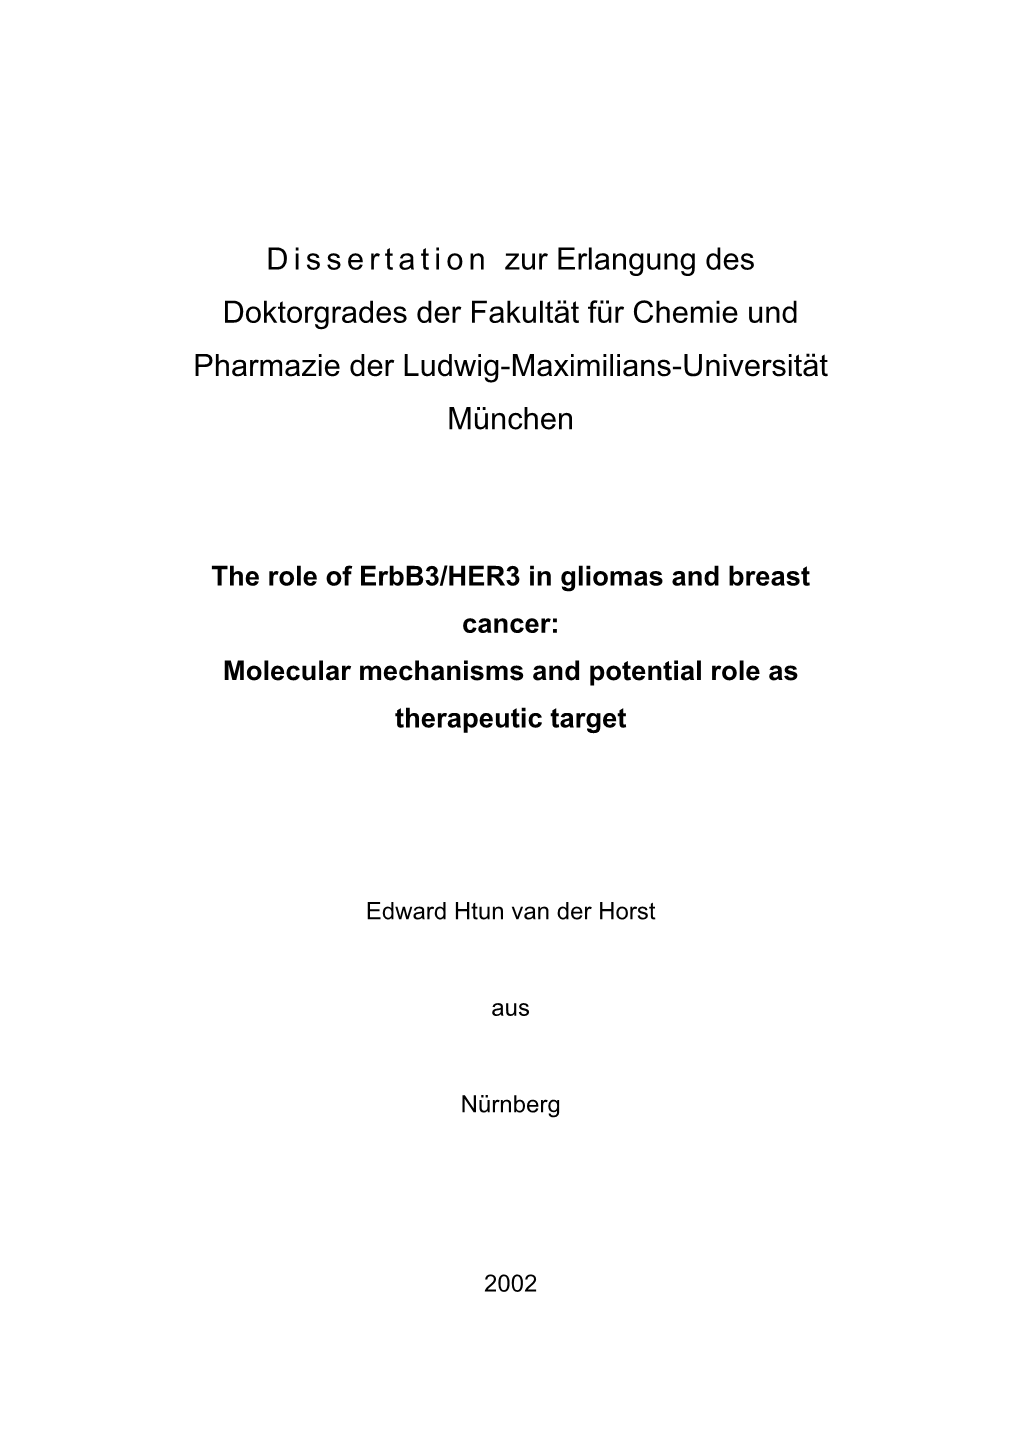 The Role of Erbb3/HER3 in Gliomas and Breast Cancer: Molecular Mechanisms and Potential Role As Therapeutic Target